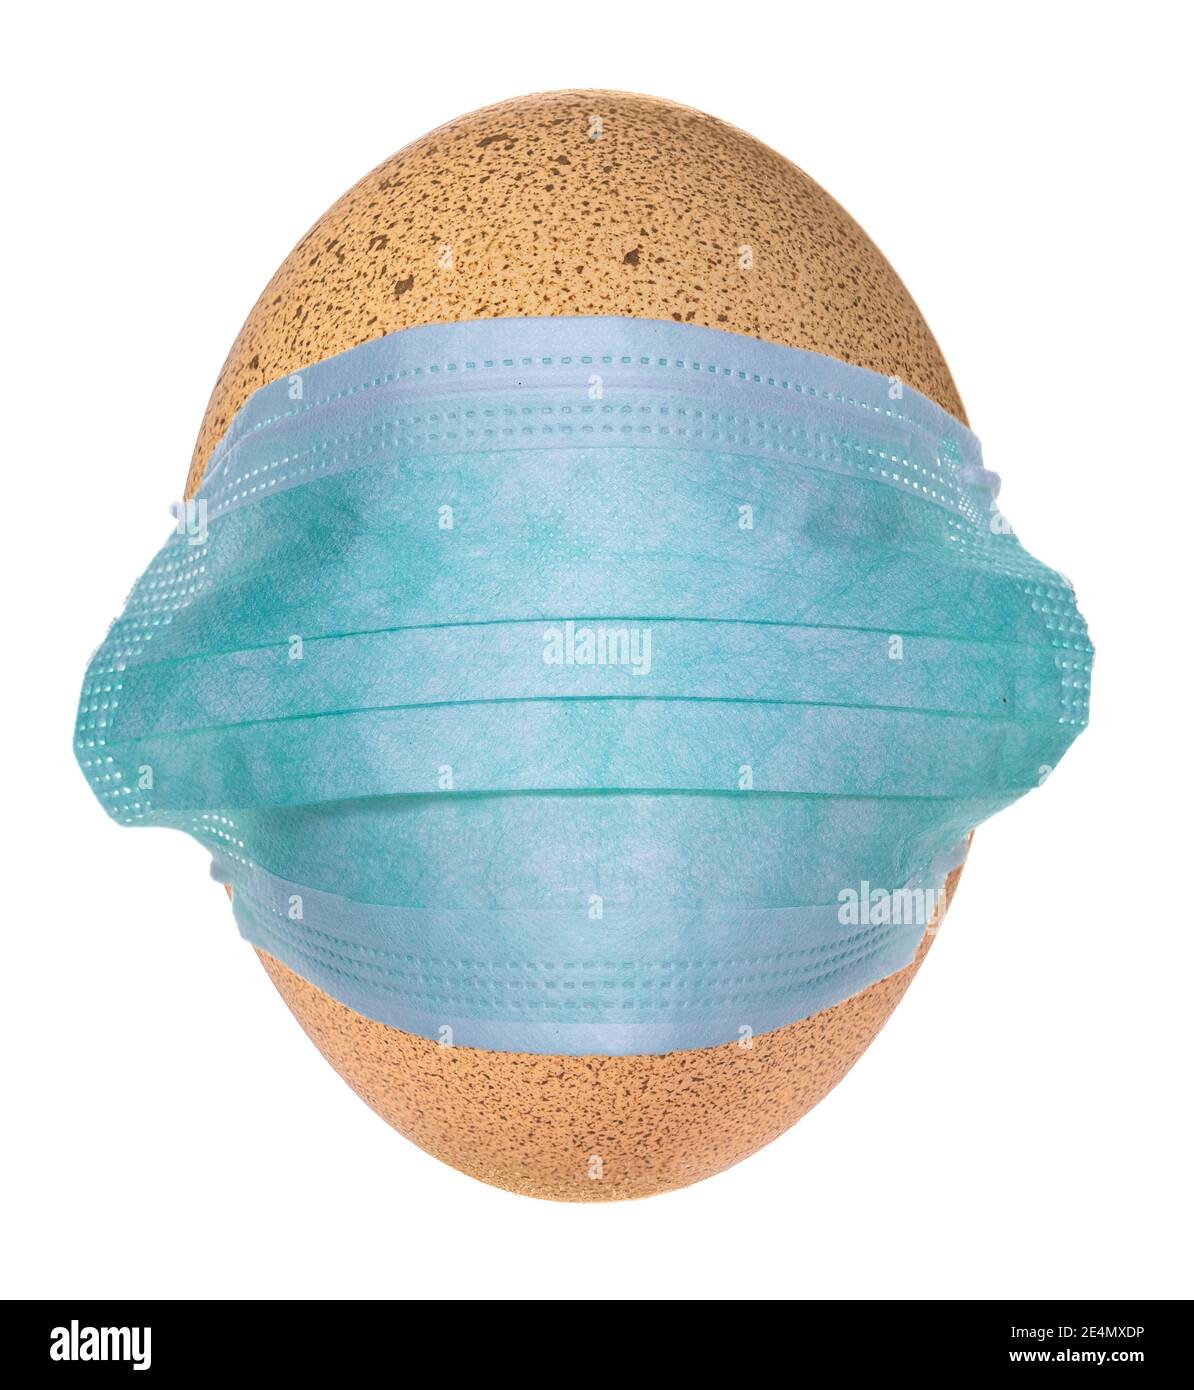 Virus protective, medical face mask put on a chicken egg. Stock Photo